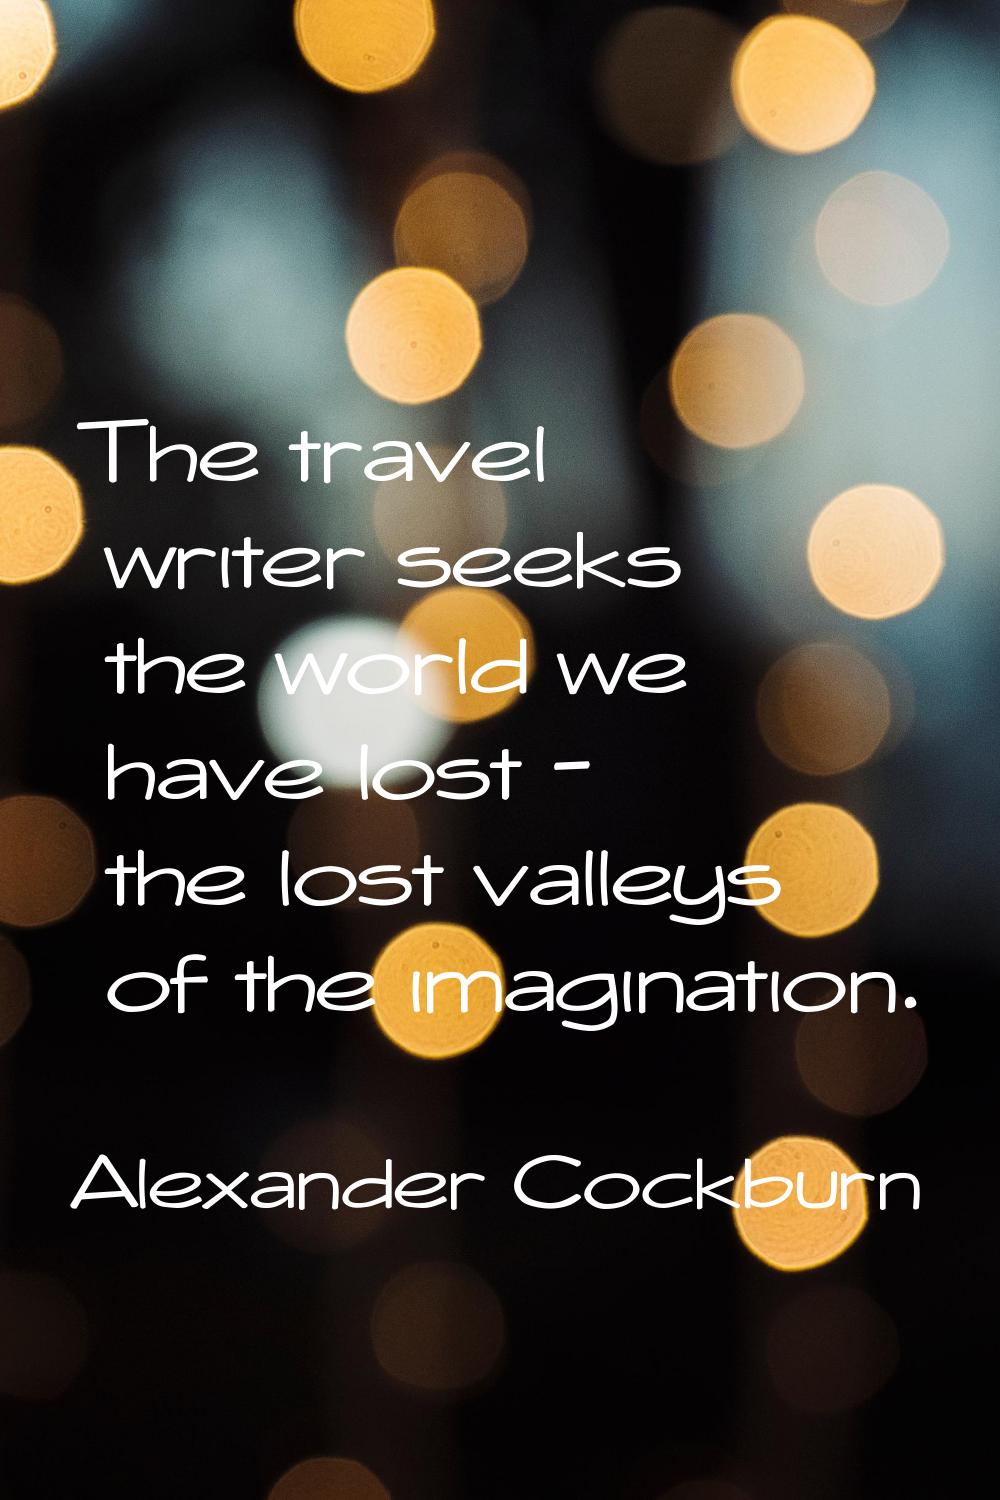 The travel writer seeks the world we have lost - the lost valleys of the imagination.